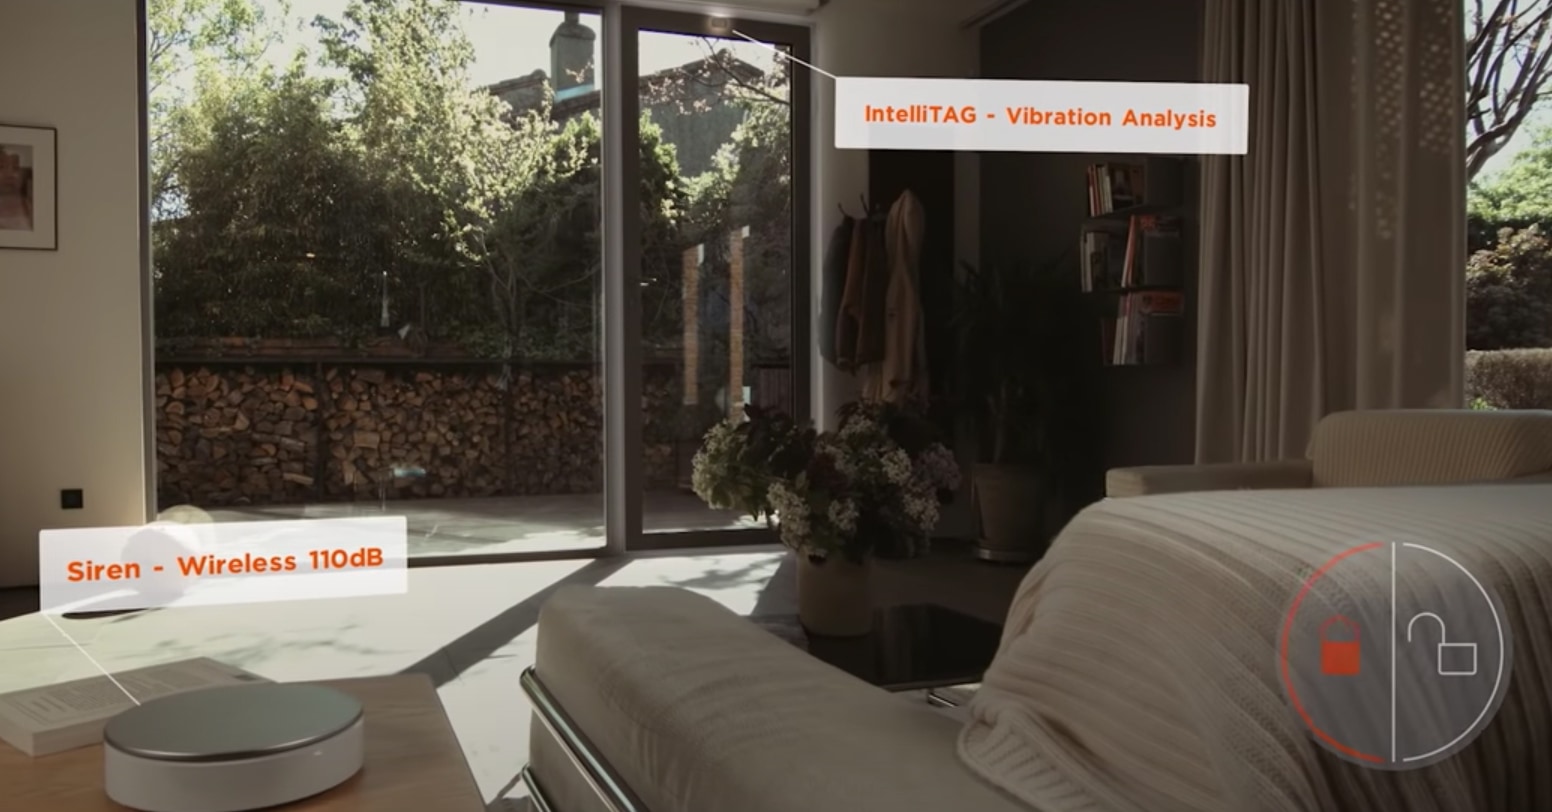 screengrab from a youtube video of an interior home scene with graphic overlays saying "Siren - Wireless 110dB" and "IntelliTAG - Vibration Analysis"